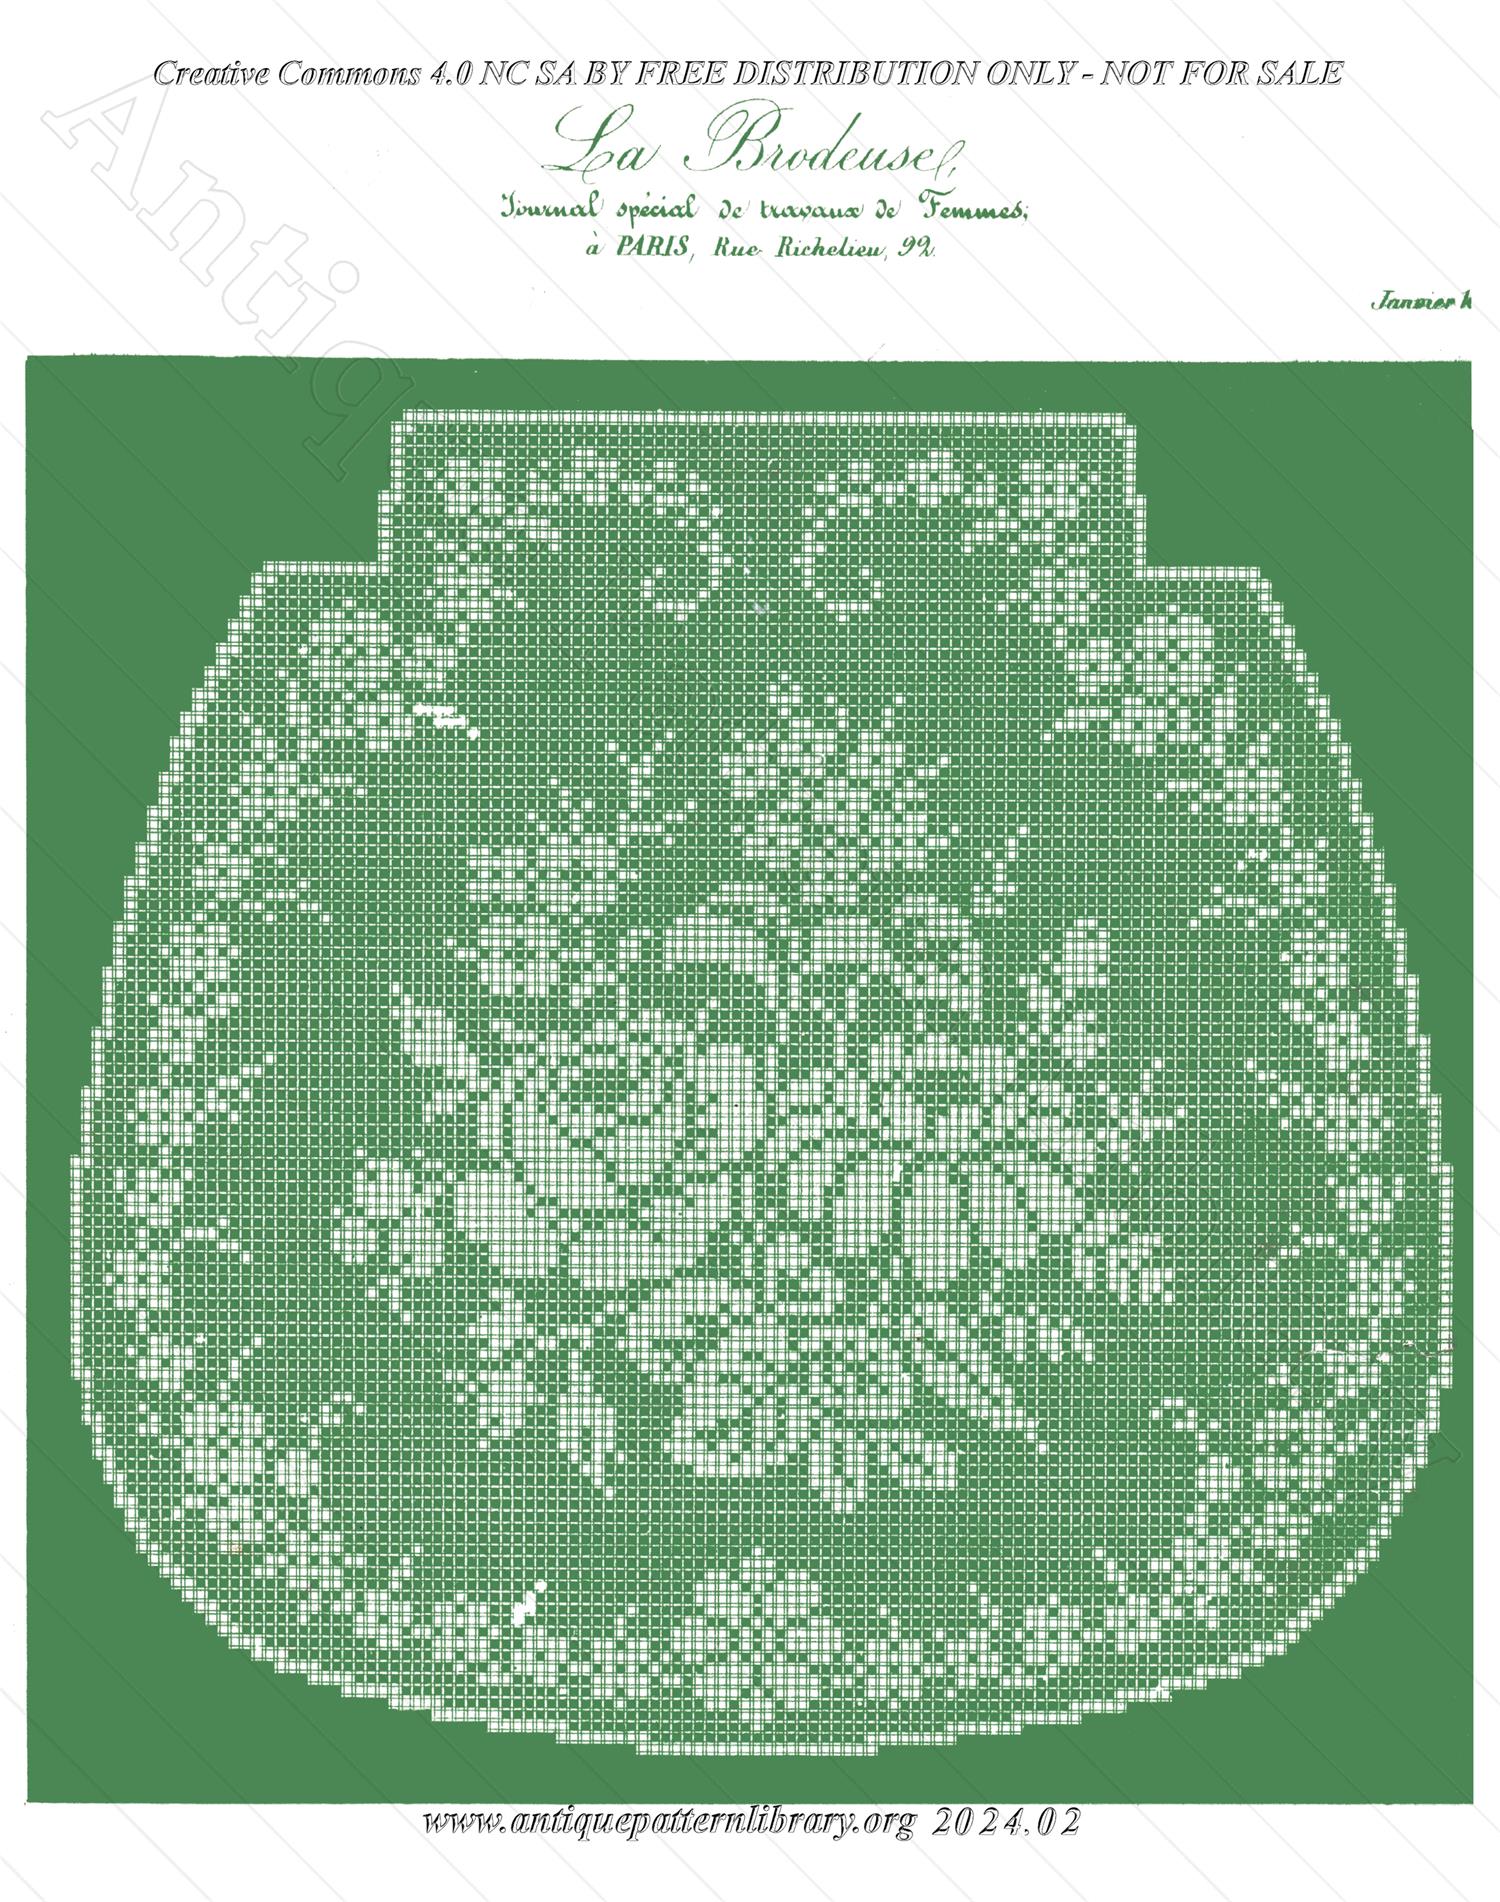 I-MU004 Filet pattern of a chair seat, in green and white.